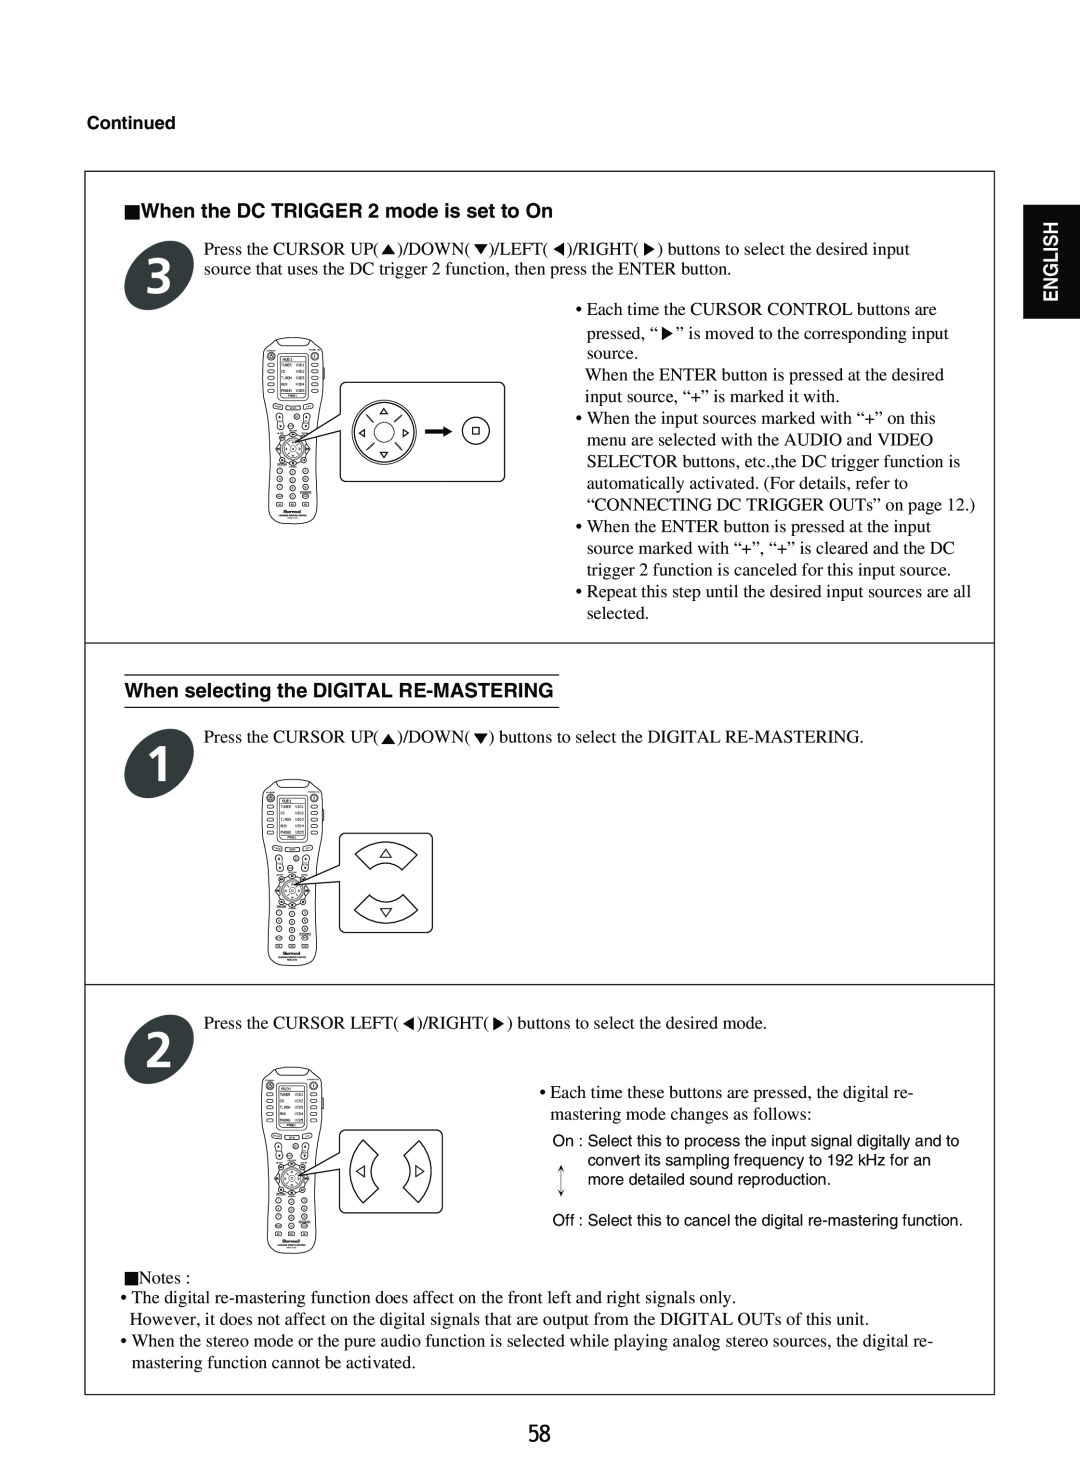 Sherwood R-965 manual When the DC TRIGGER 2 mode is set to On, When selecting the DIGITAL RE-MASTERING, Continued, English 